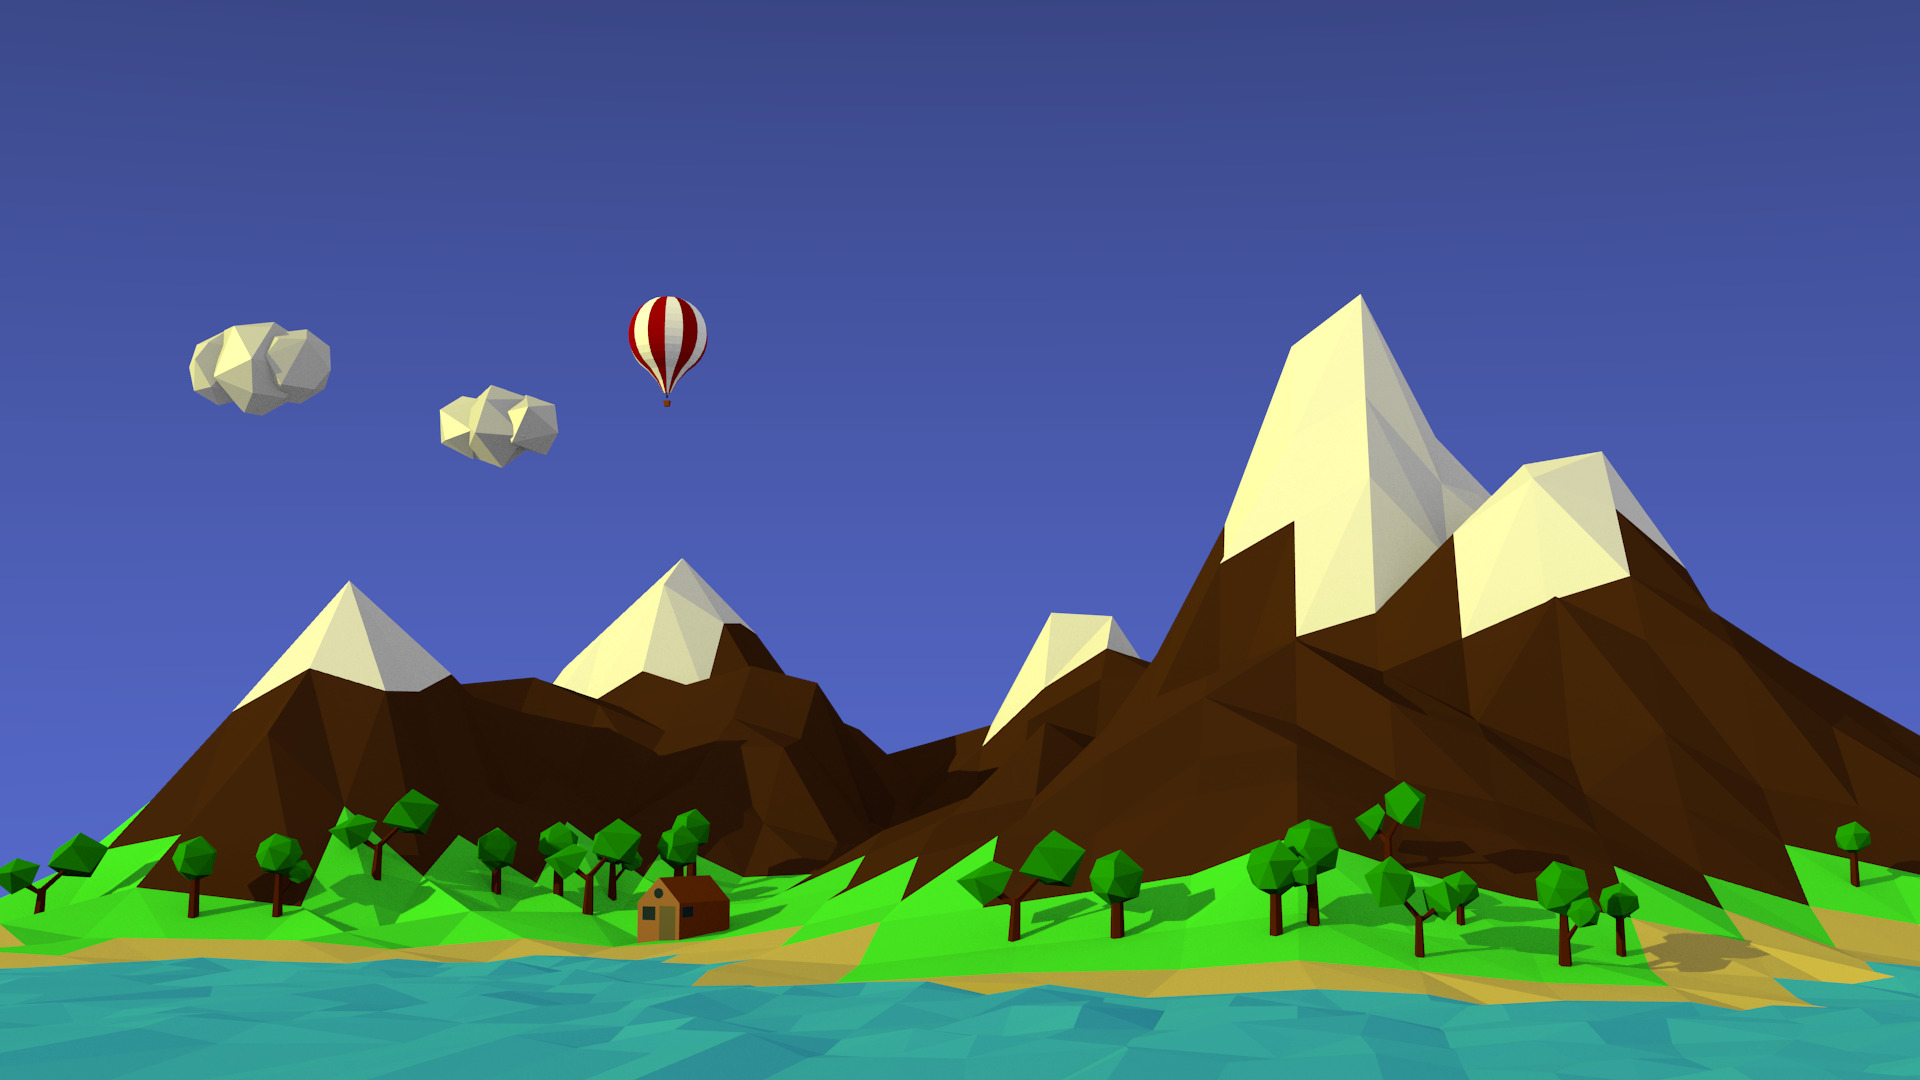 low Poly, Landscape, Mountains, Hot Air Balloons Wallpaper